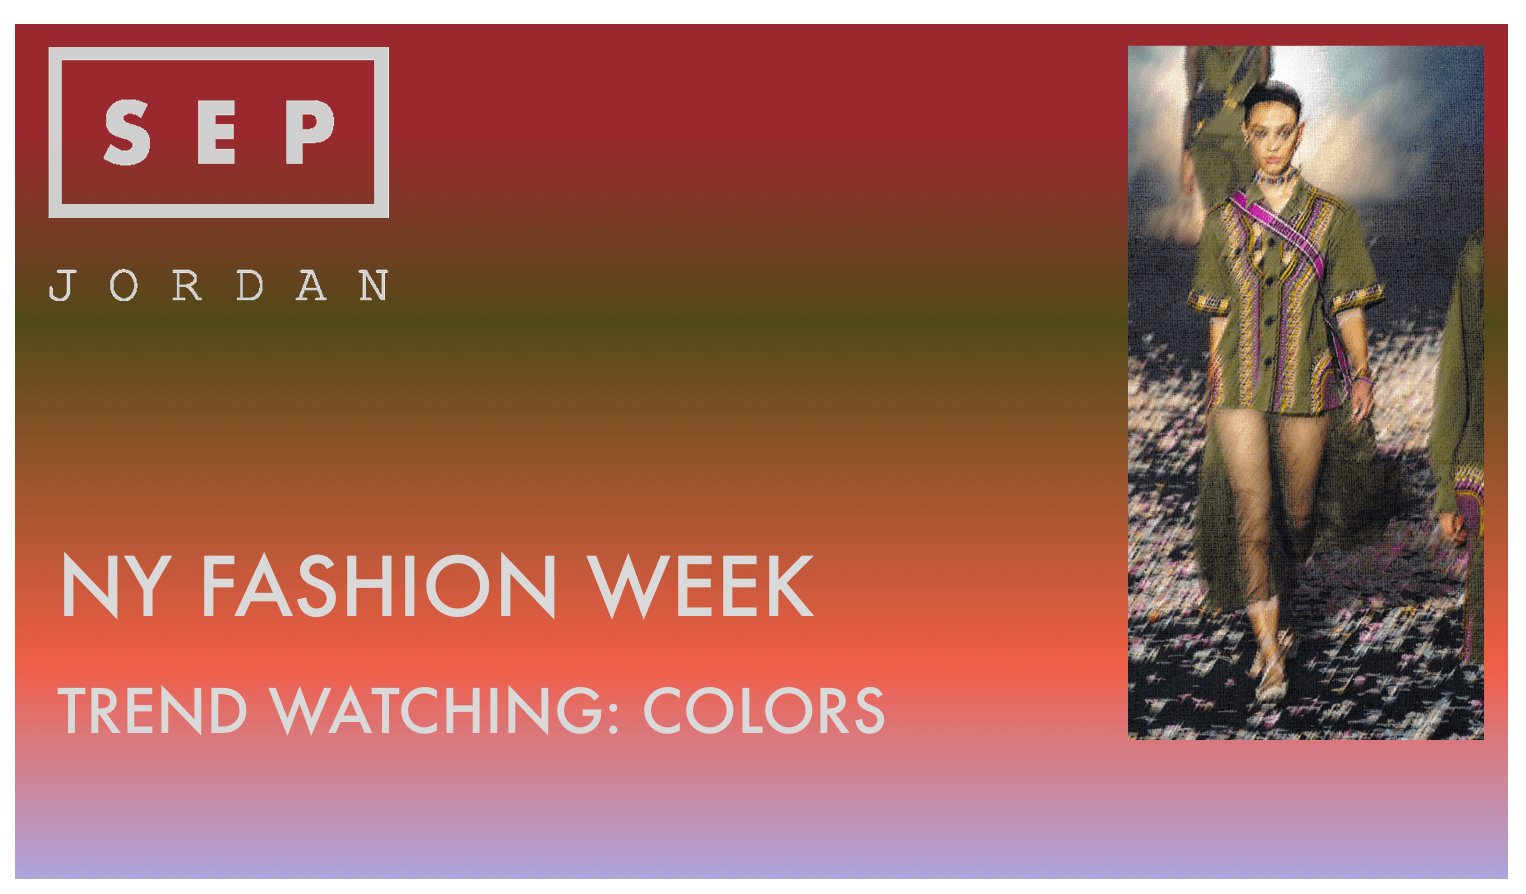 New York Fashion Week: Color trends